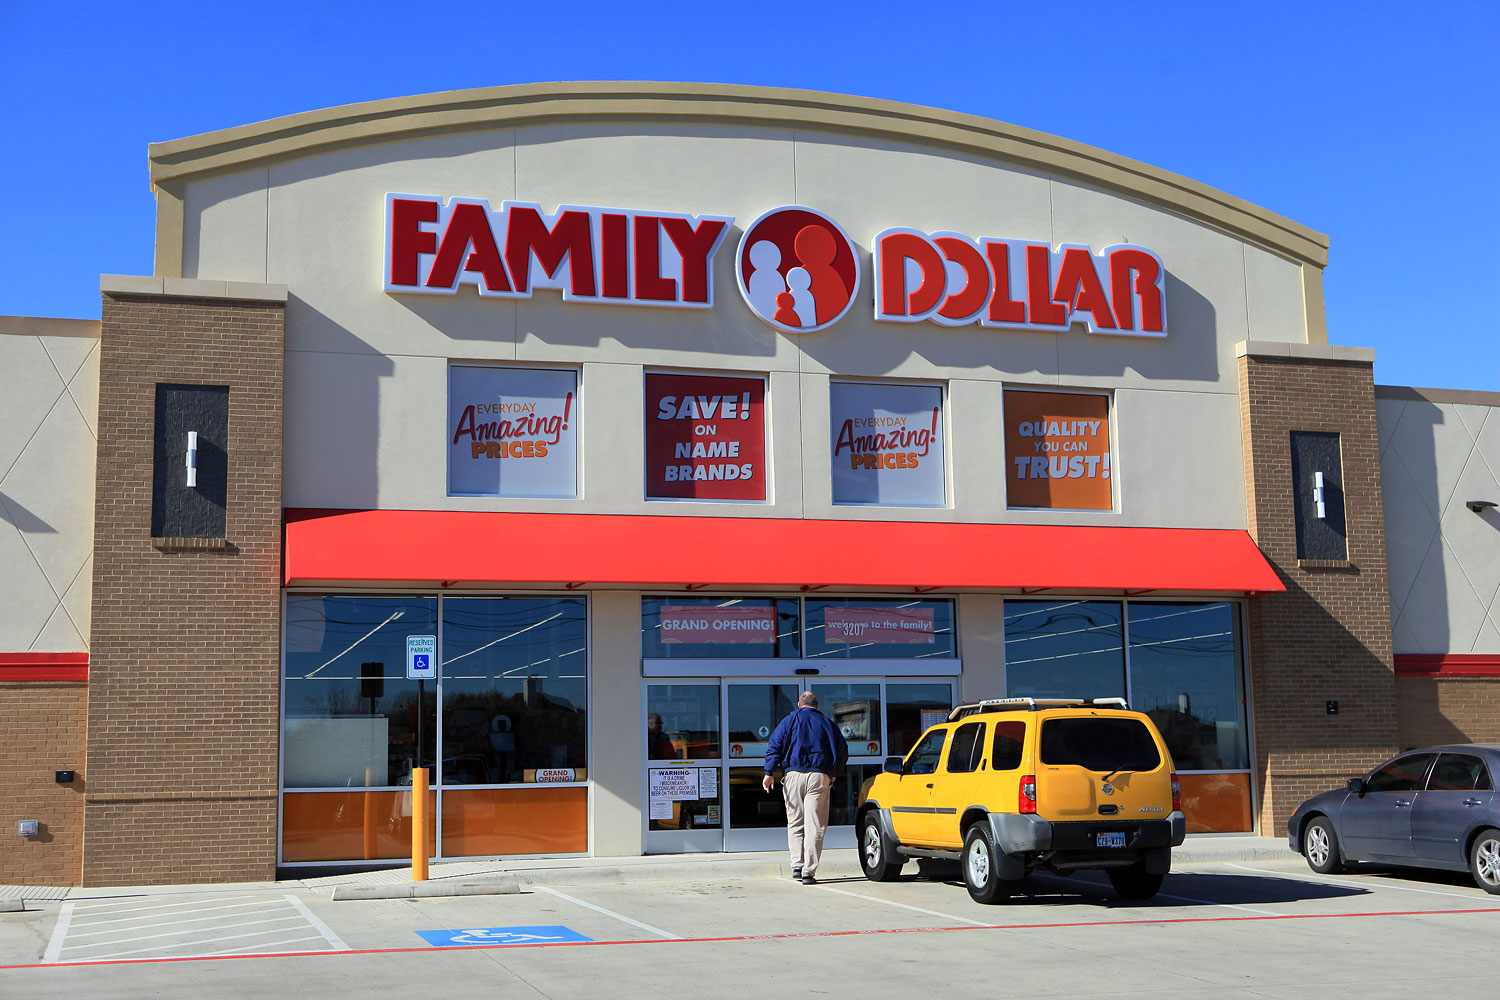 The store front of a Family Dollar Stores Inc. location in Mansfield, Texas, Jan. 7, 2014.